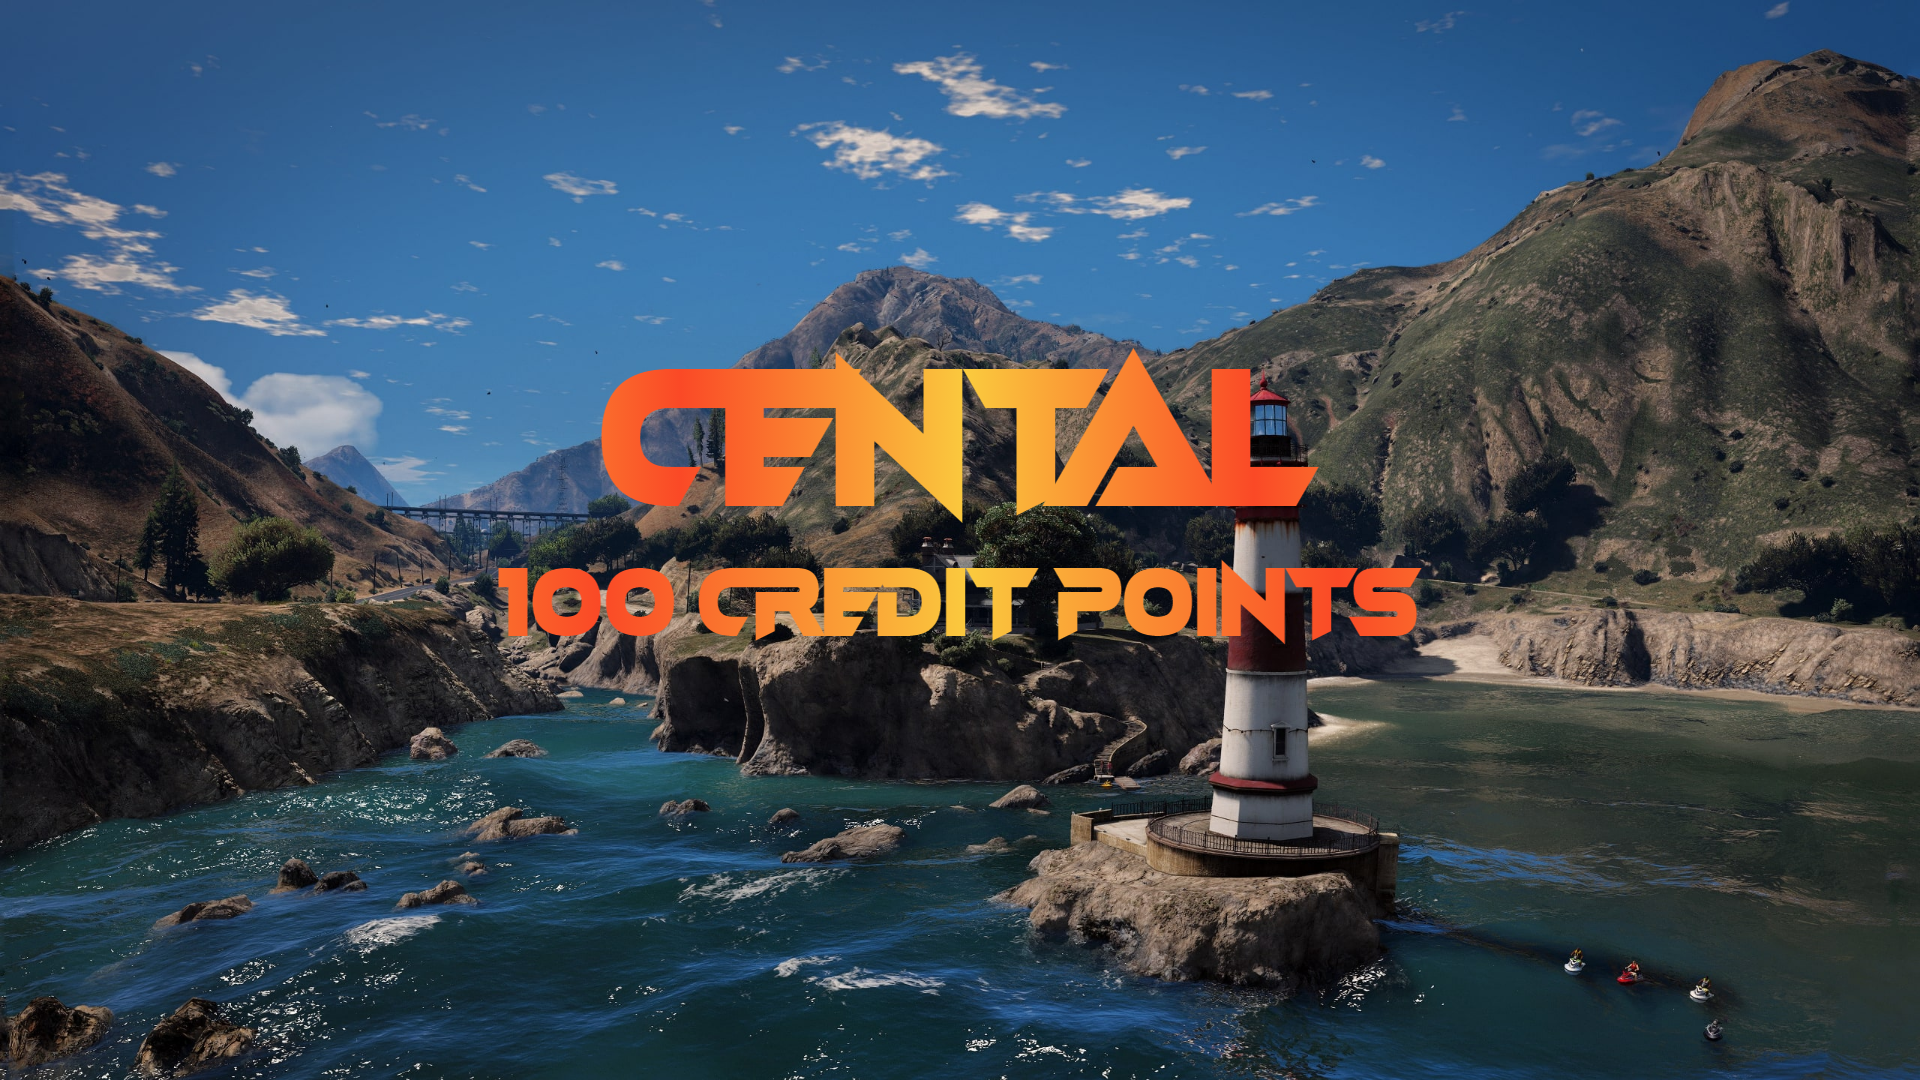 CentralRP - 100 Credit Points Gift Card 11.29$